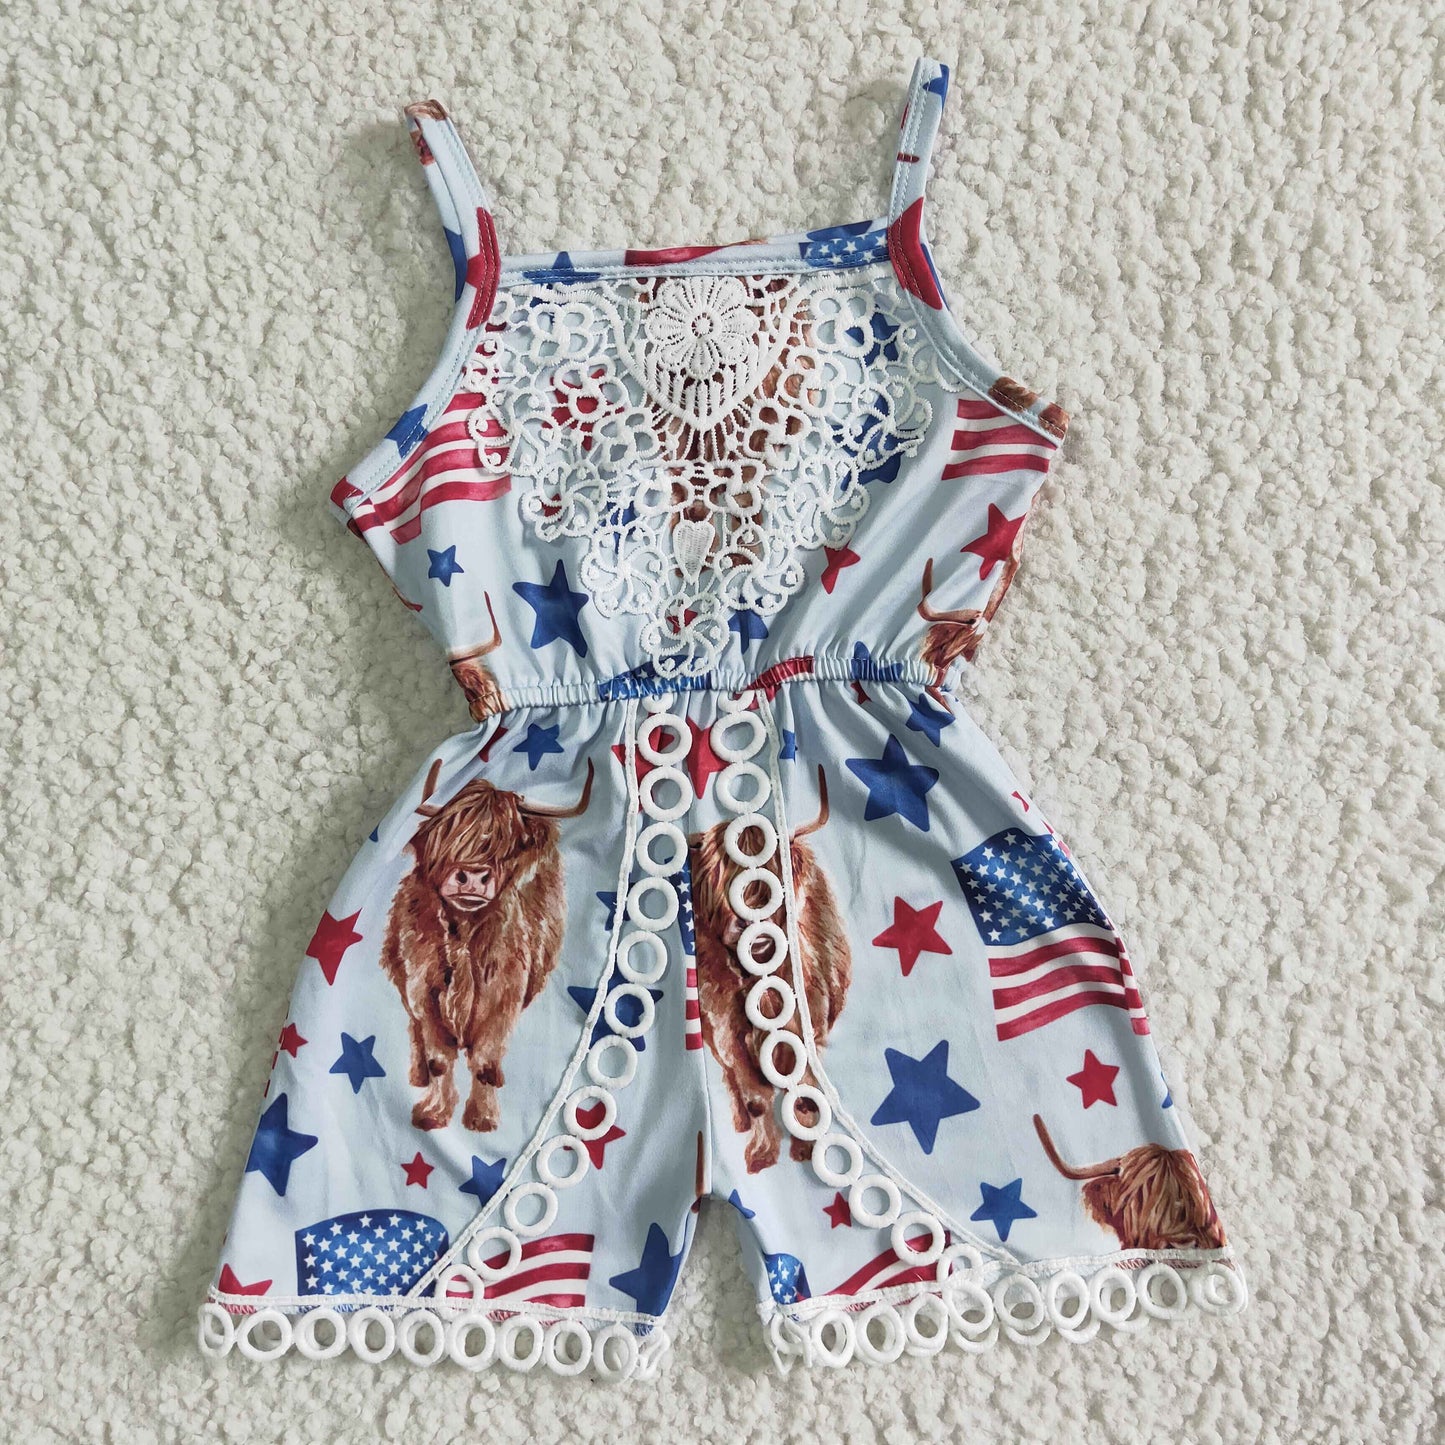 SR0053 BABY GIRLS HIGHLAND COW JULY 4TH JUMPSUIT